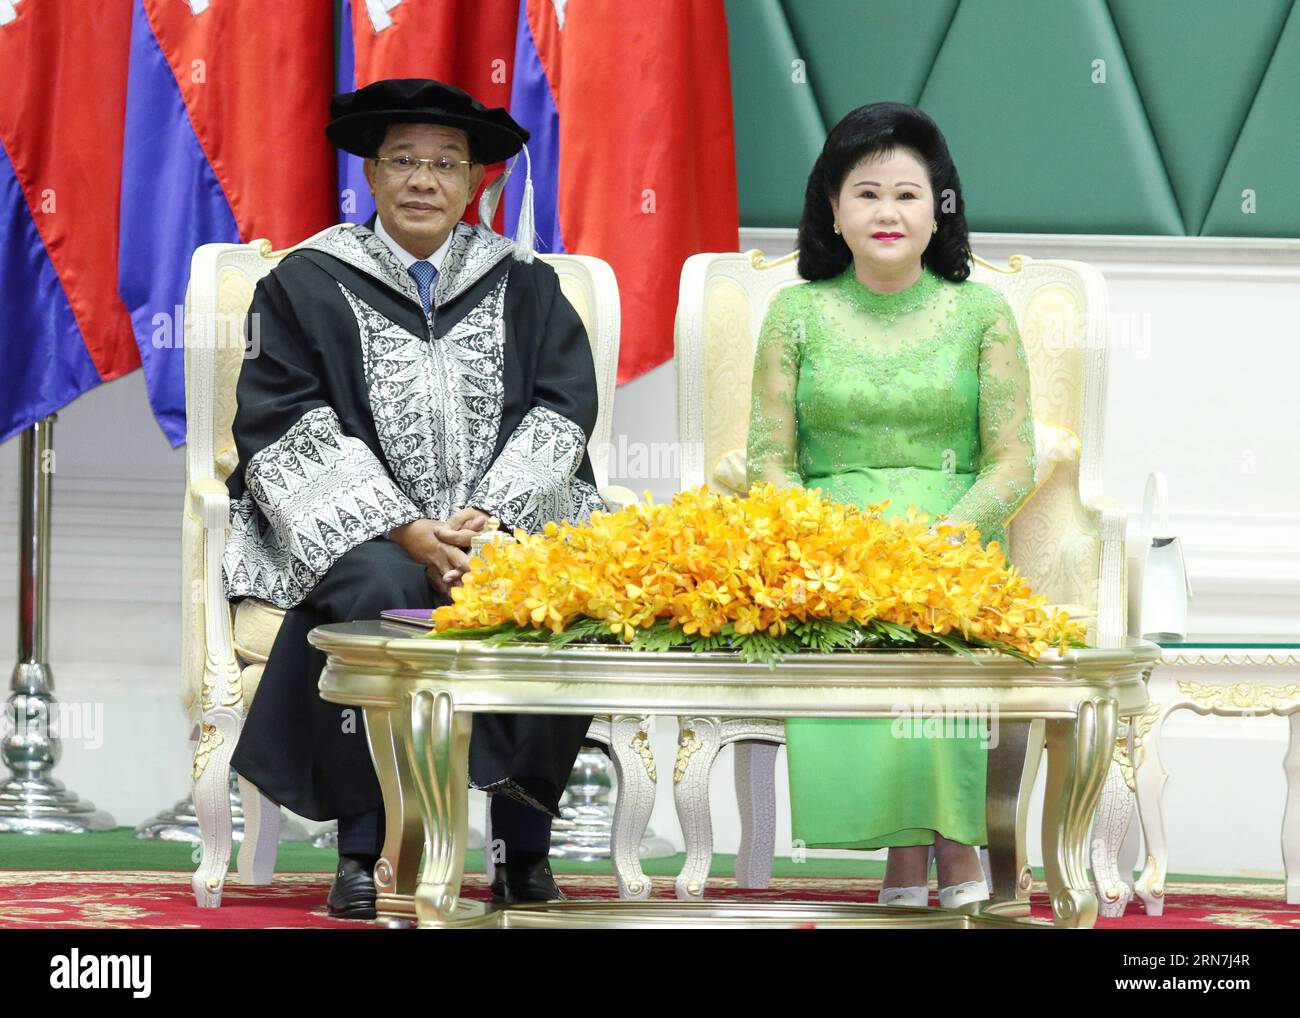 (150909) -- PHNOM PENH, Sept. 9, 2015 -- Cambodian Prime Minister Hun Sen (L) and his wife Bun Rany attend a ceremony in Phnom Penh, Cambodia, Sept. 9, 2015. Malaysia s prestigious Limkokwing University awarded Hun Sen the Honorary Doctorate Degree of Transformational Leadership on Wednesday in a ceremony held at the Peace Palace in the Cambodian capital. ) CAMBODIA-PHNOM PENH-PM-HONORARY DOCTORATE Sovannara PUBLICATIONxNOTxINxCHN Stock Photo